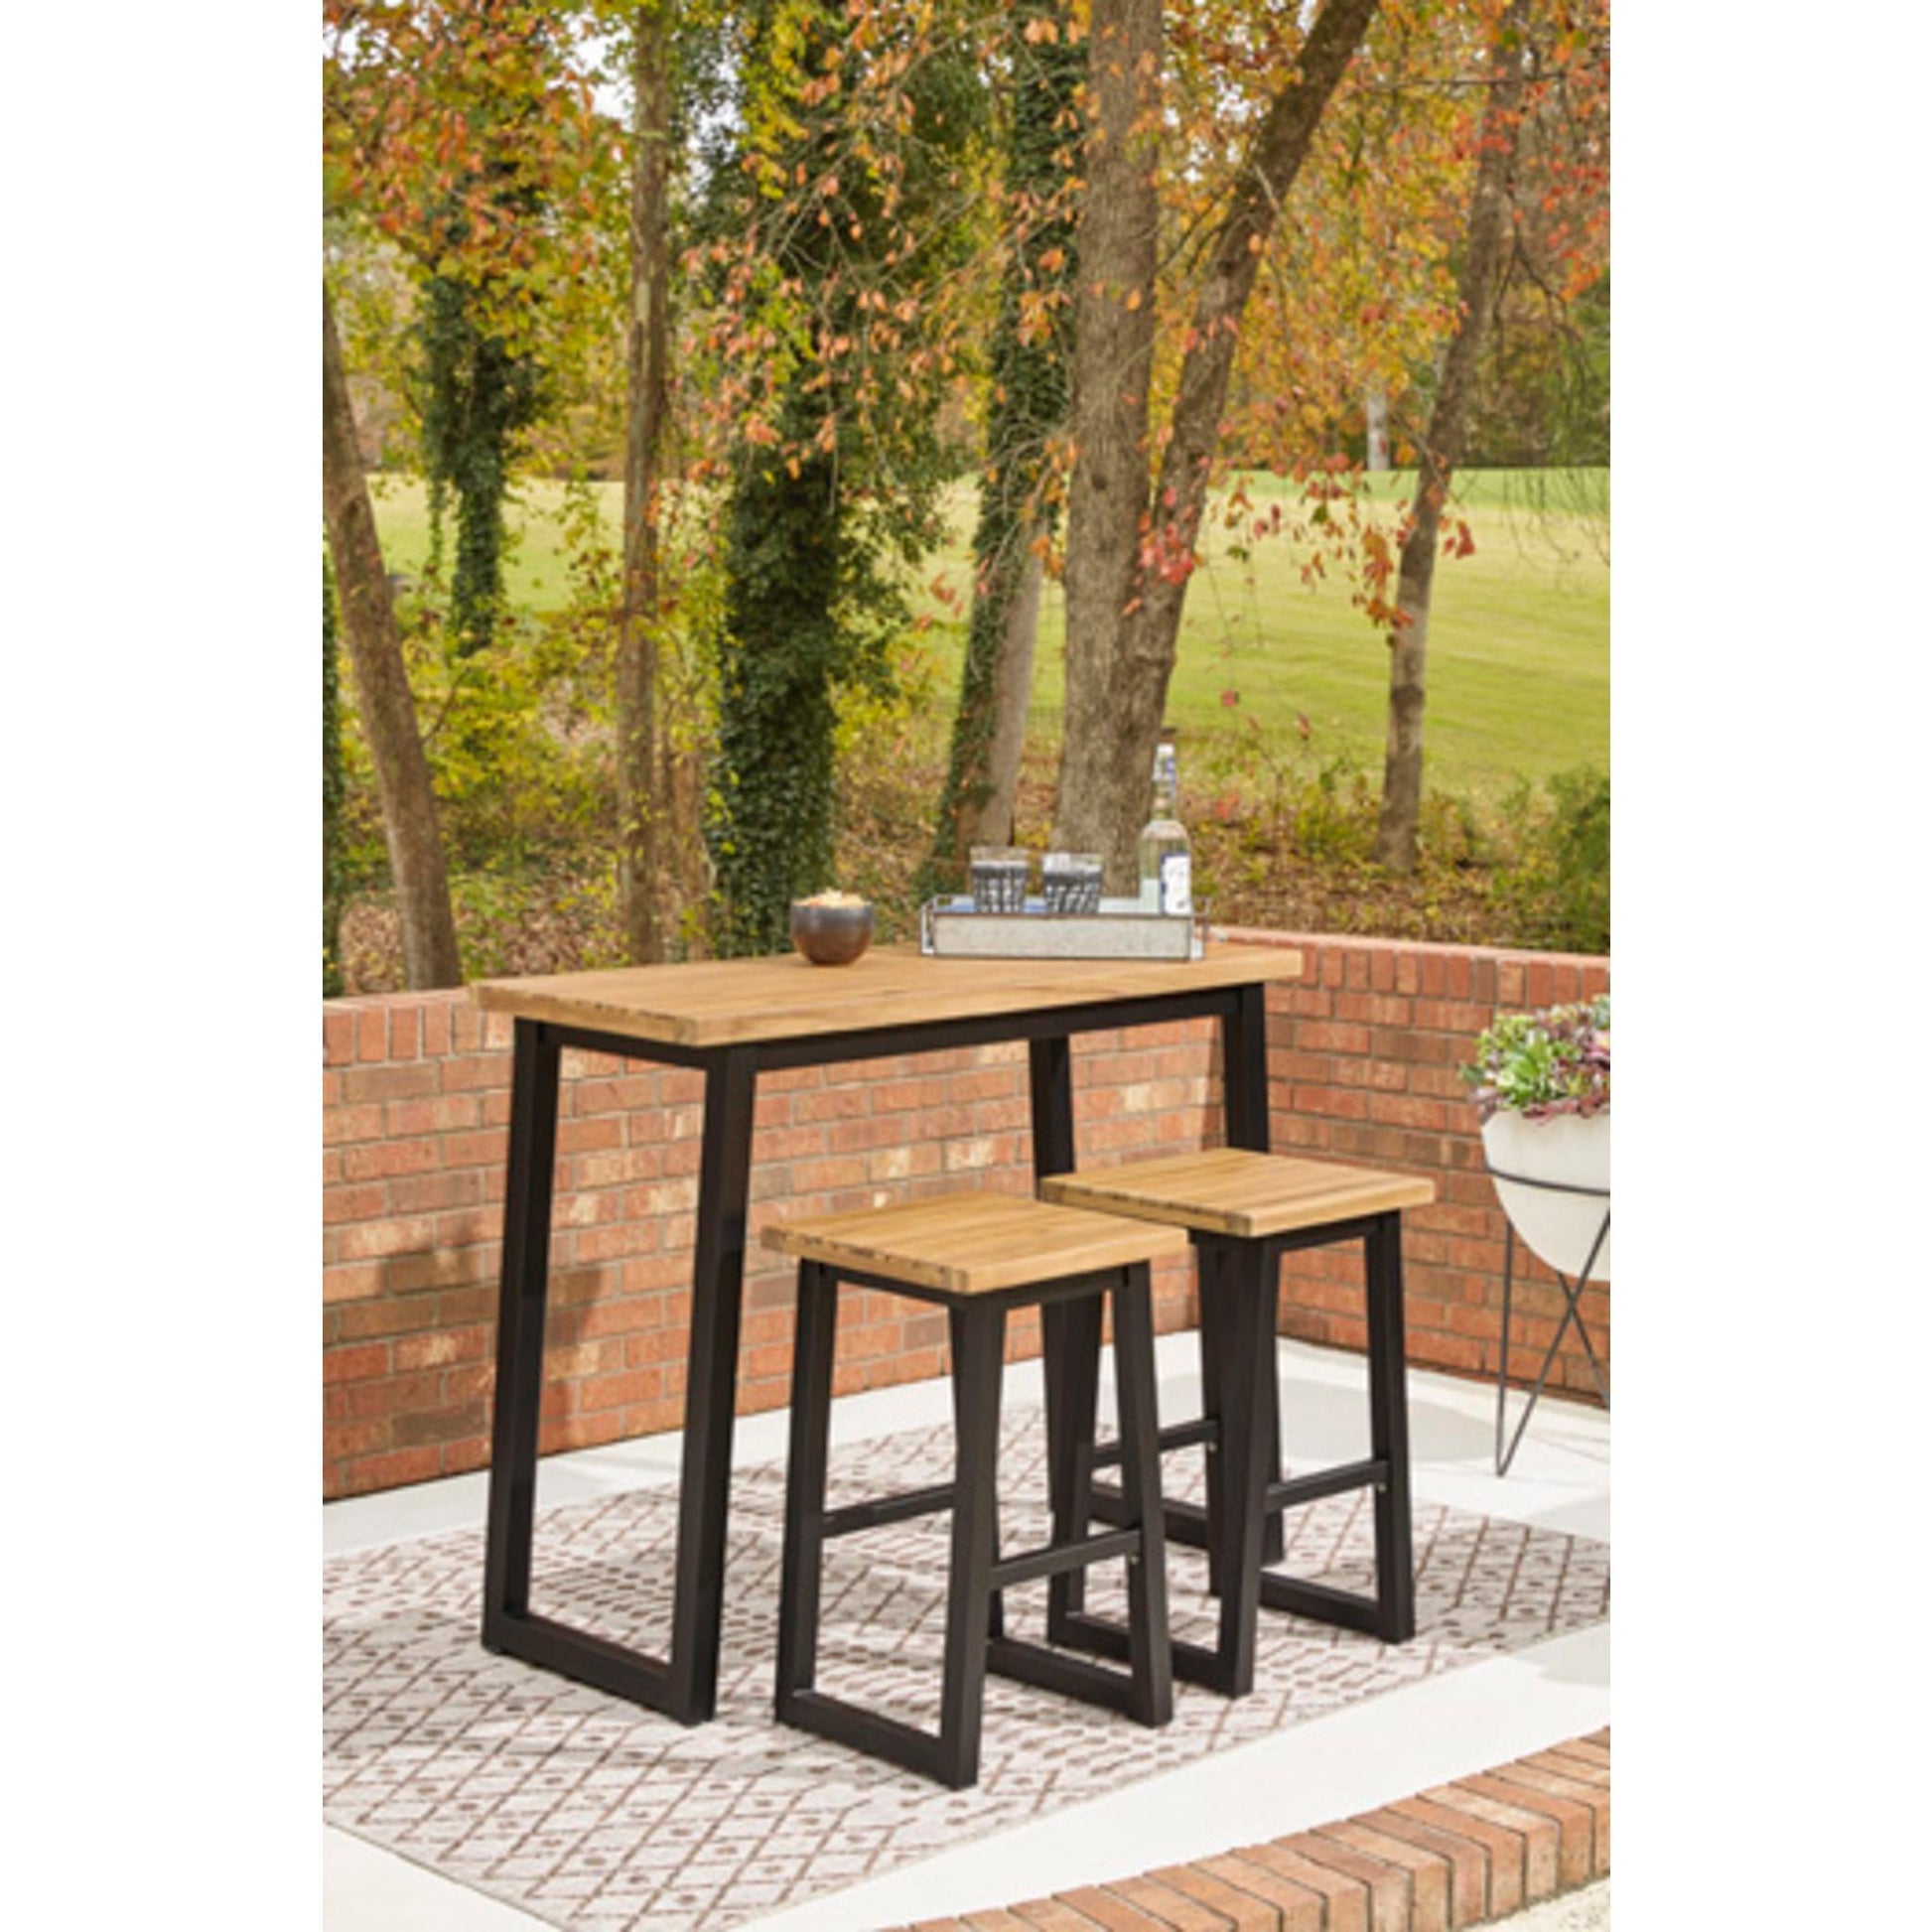 Outdoor Town Wood Table and Pair of Chairs Brown/Black